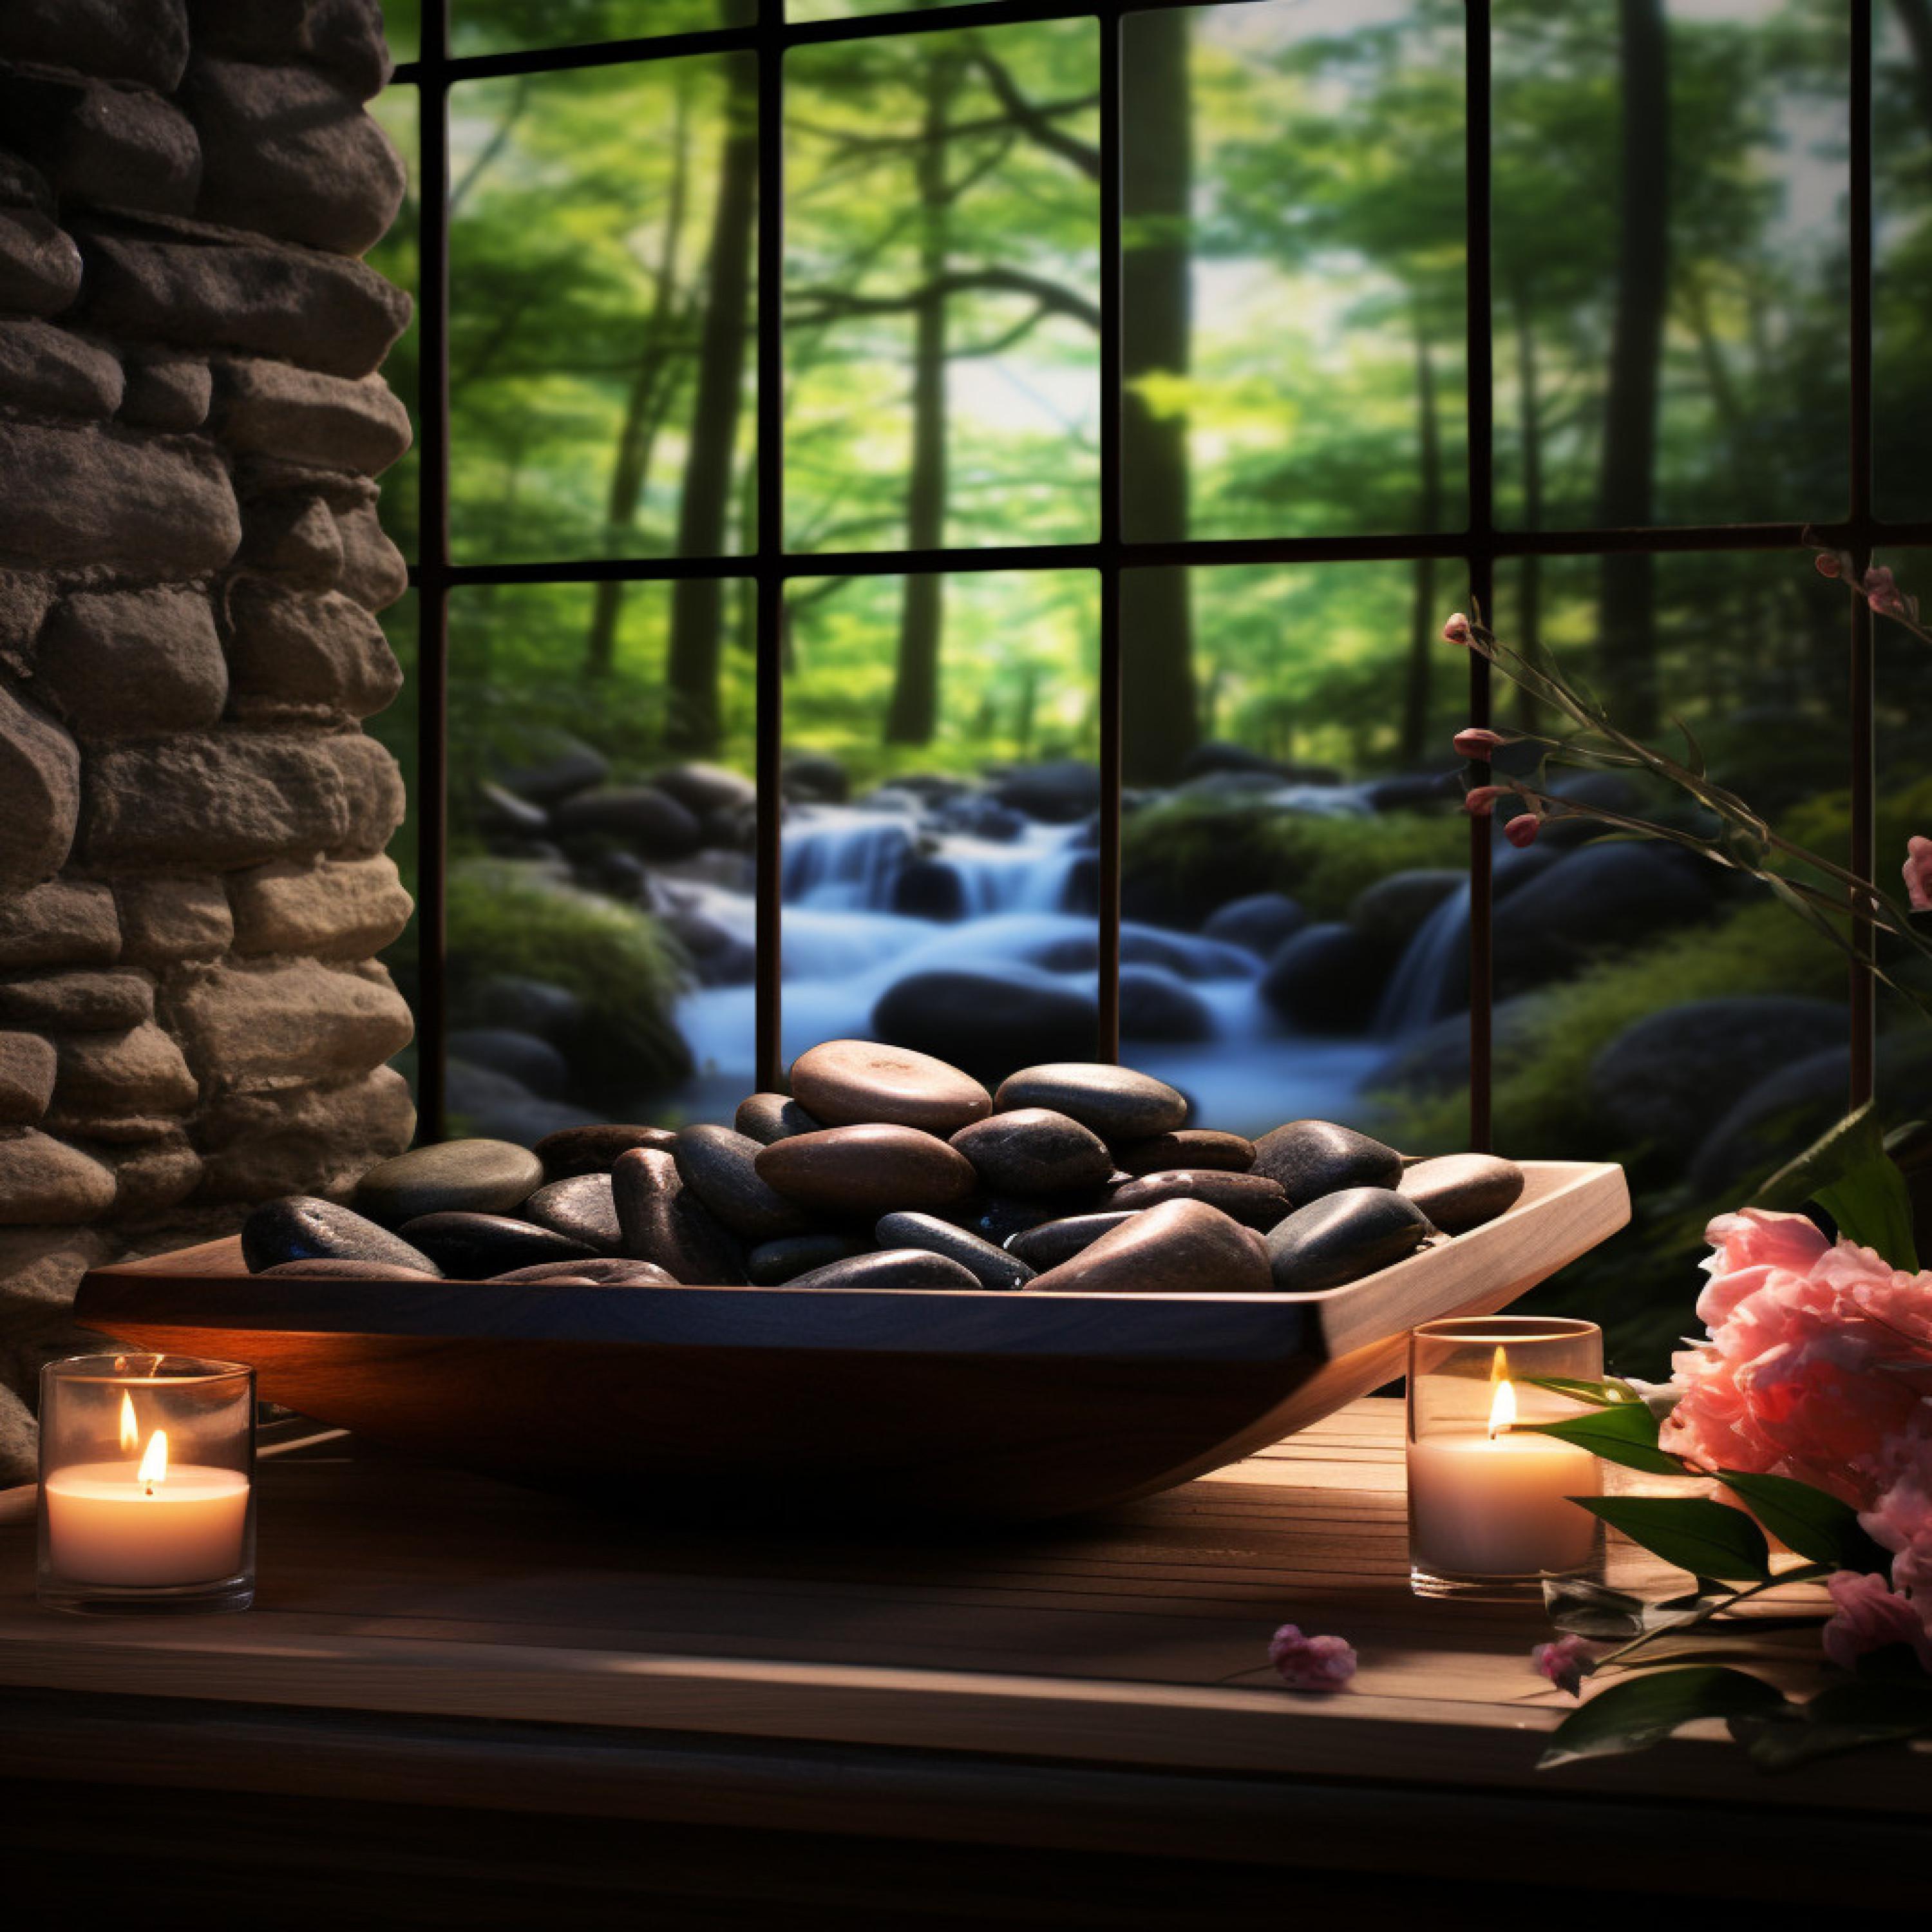 Pure Spa Massage Music - Water’s Embrace Spa Serenity